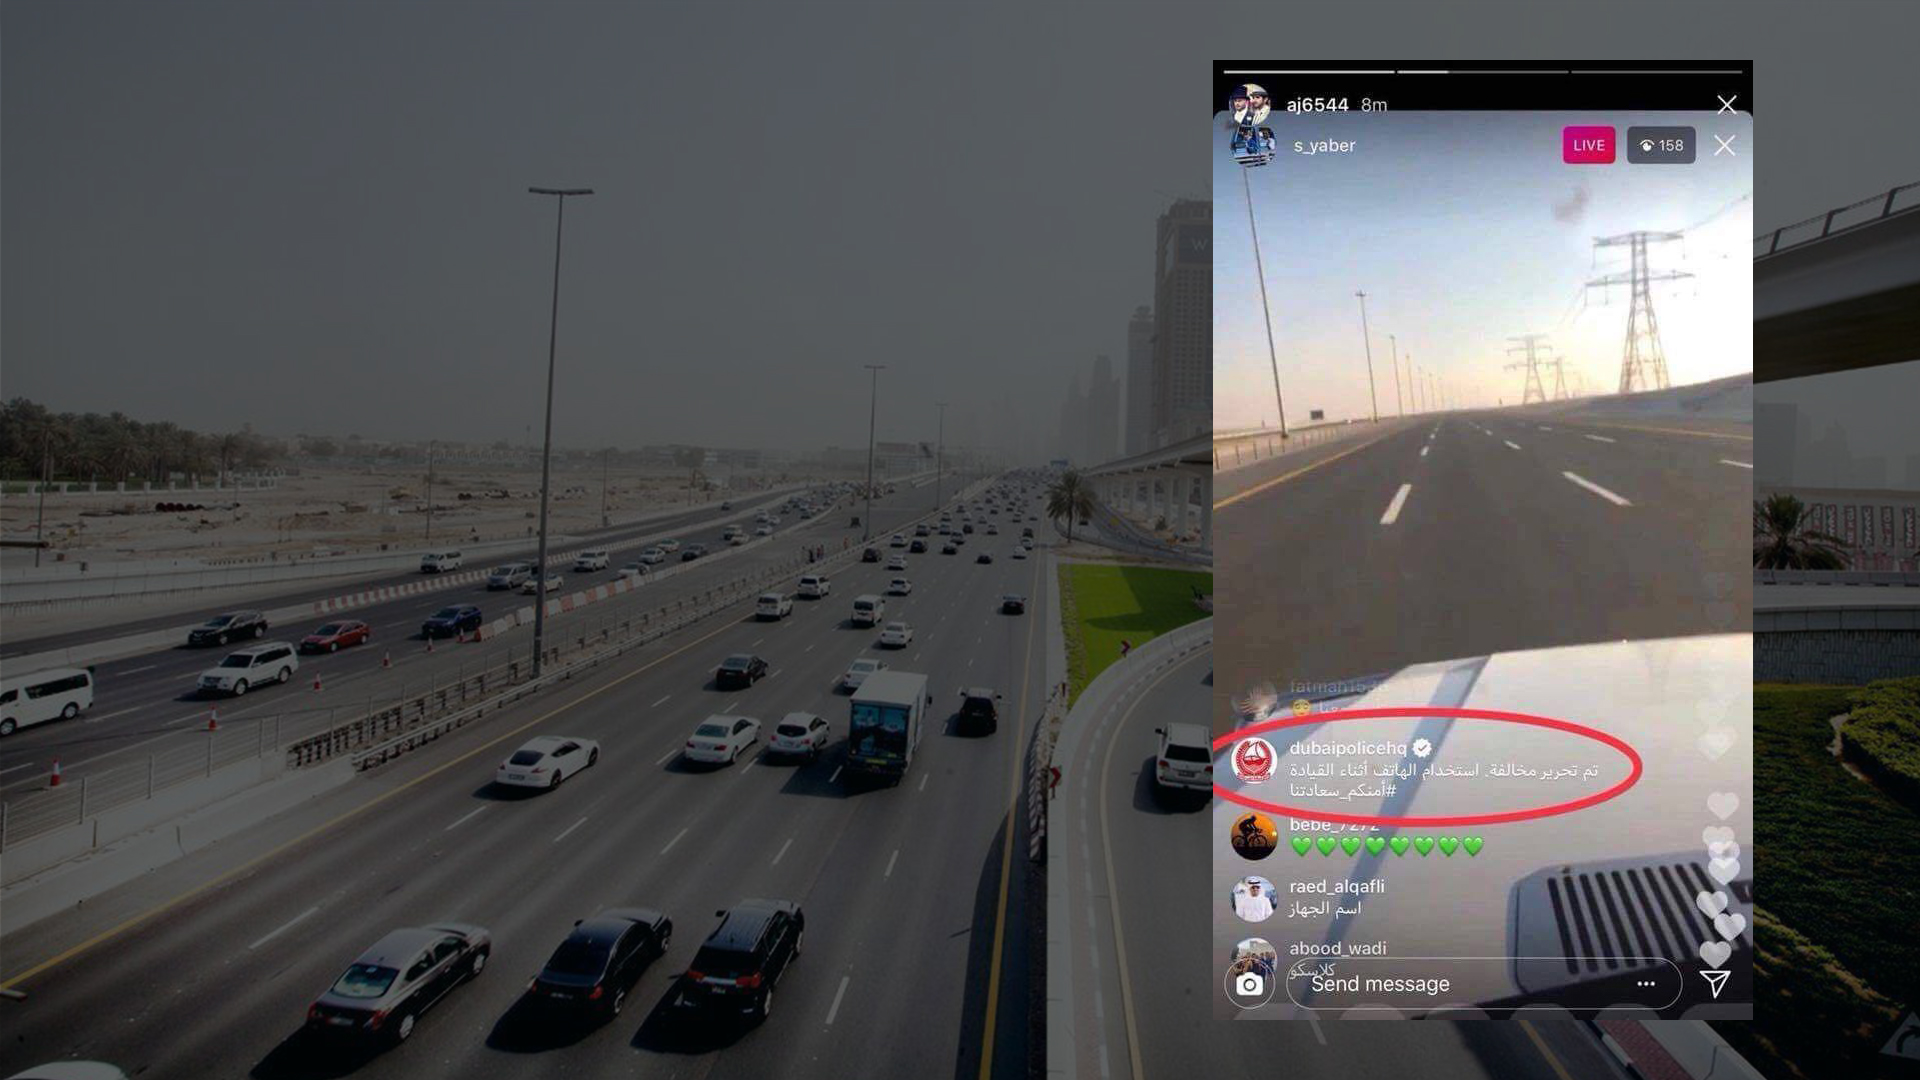 Think Marketing Dubai Police Issued a LIVE fine on this driver's instagram video while he is driving